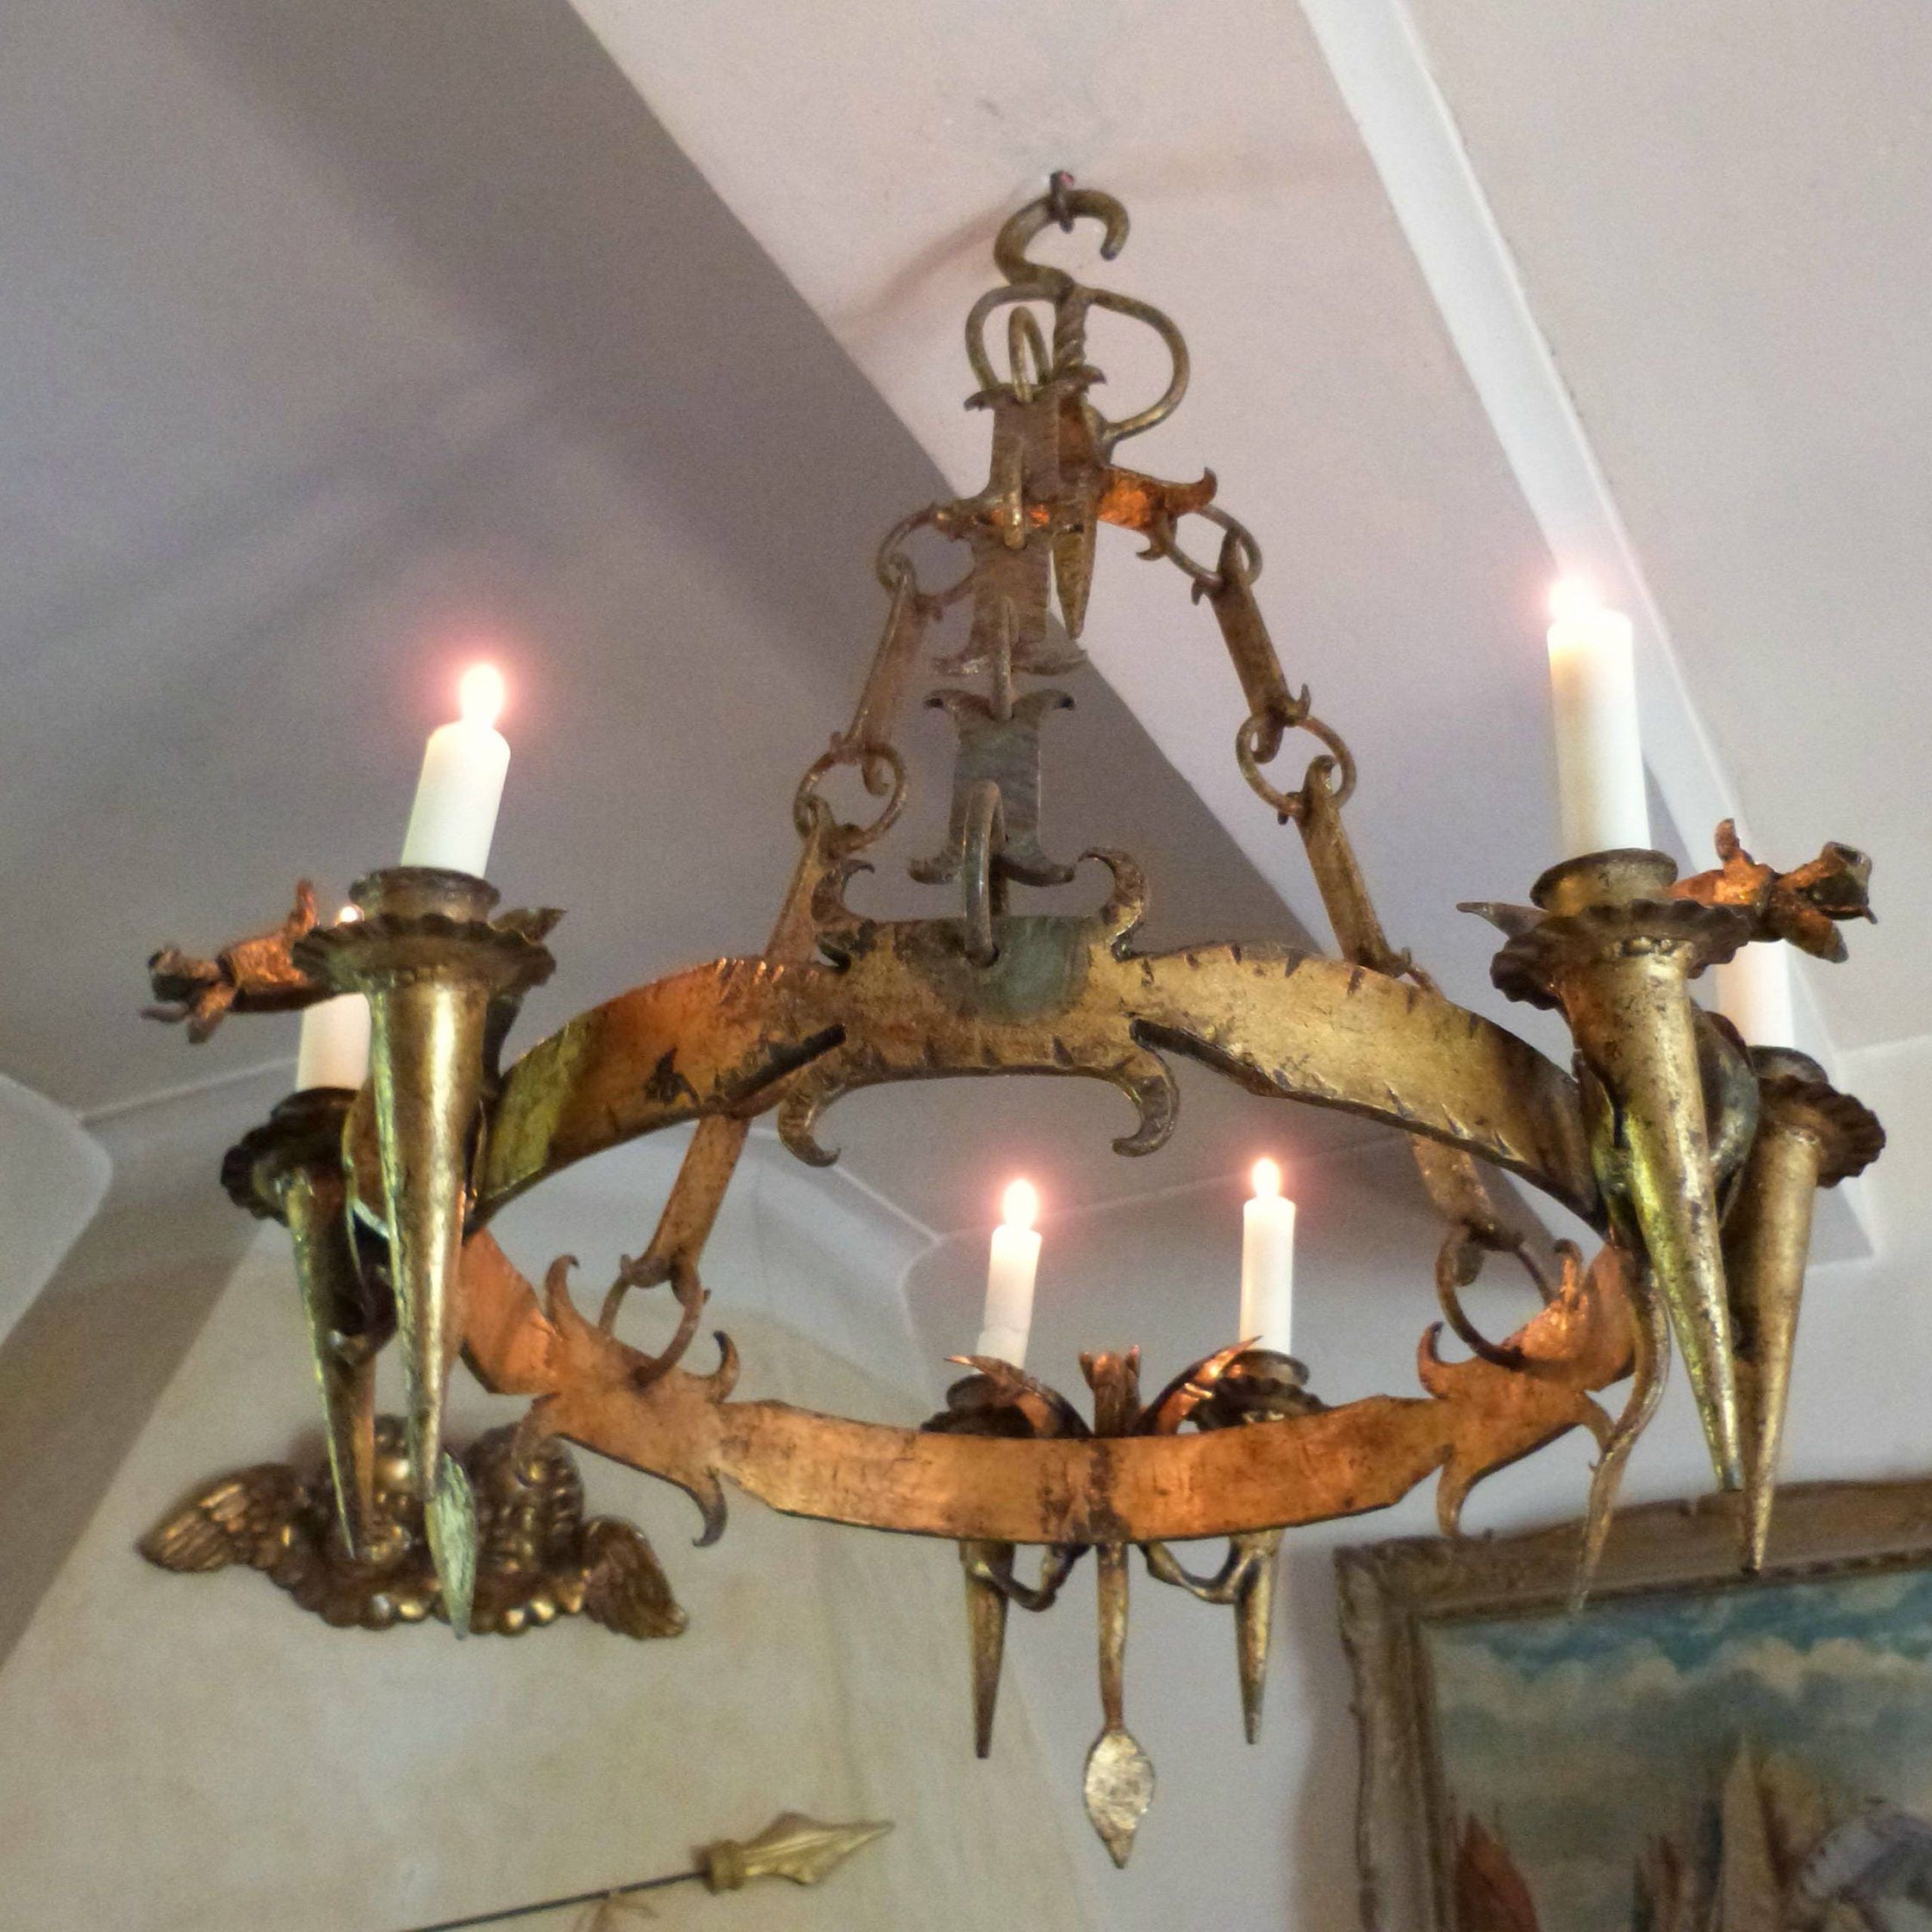 2020 Antique 1800s French Gold Tone Iron Chandelier Lighting In Antique Gild One Light Chandeliers (View 19 of 20)